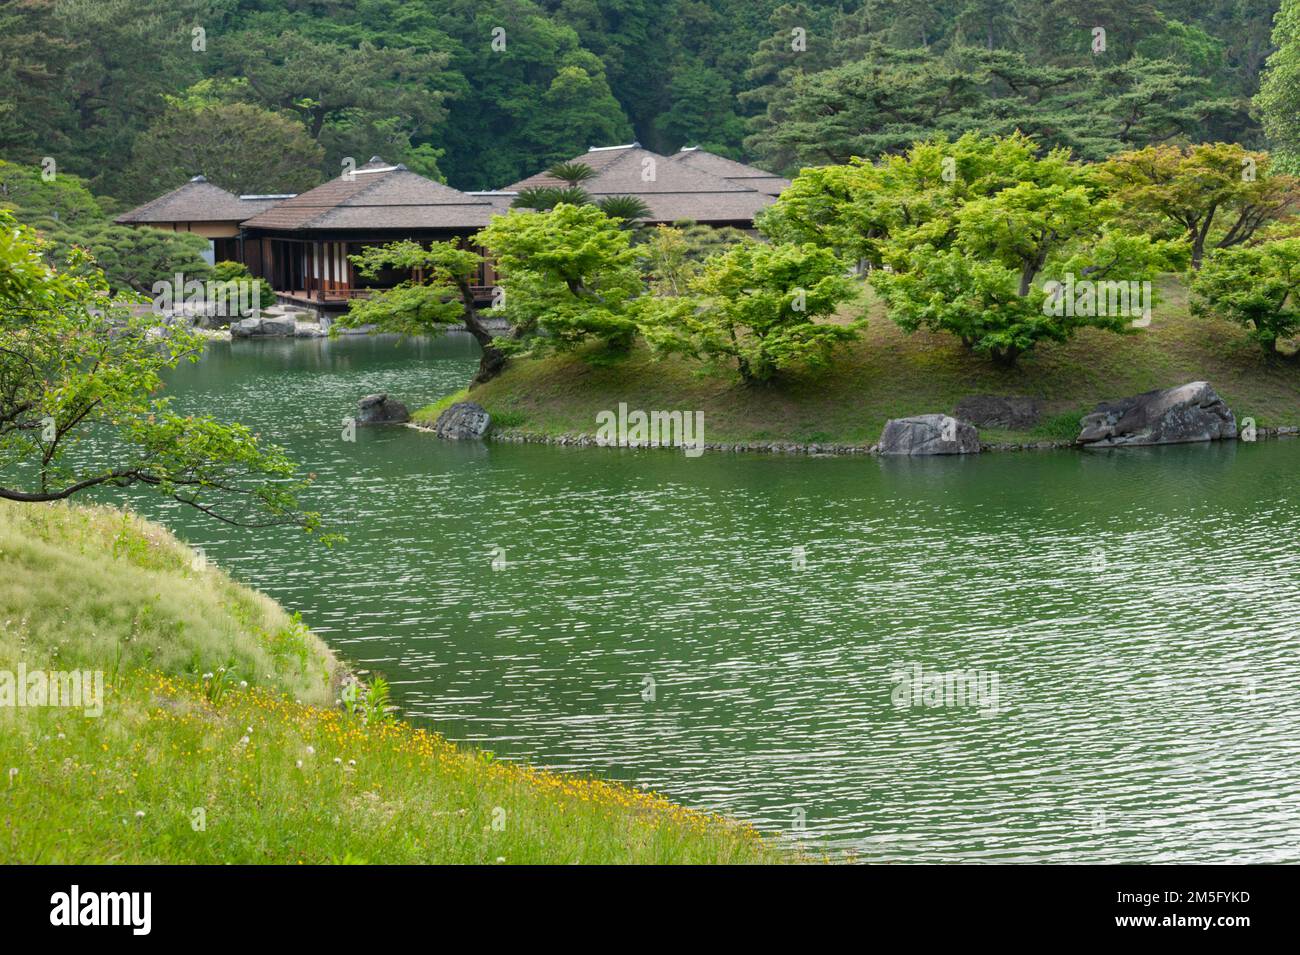 The lovely traditional Kikugetsutei Teahouse is fronted by a beautiful artificial pond and backed by the “borrowed scenery” of Mount Shiun, Takamatsu, Stock Photo